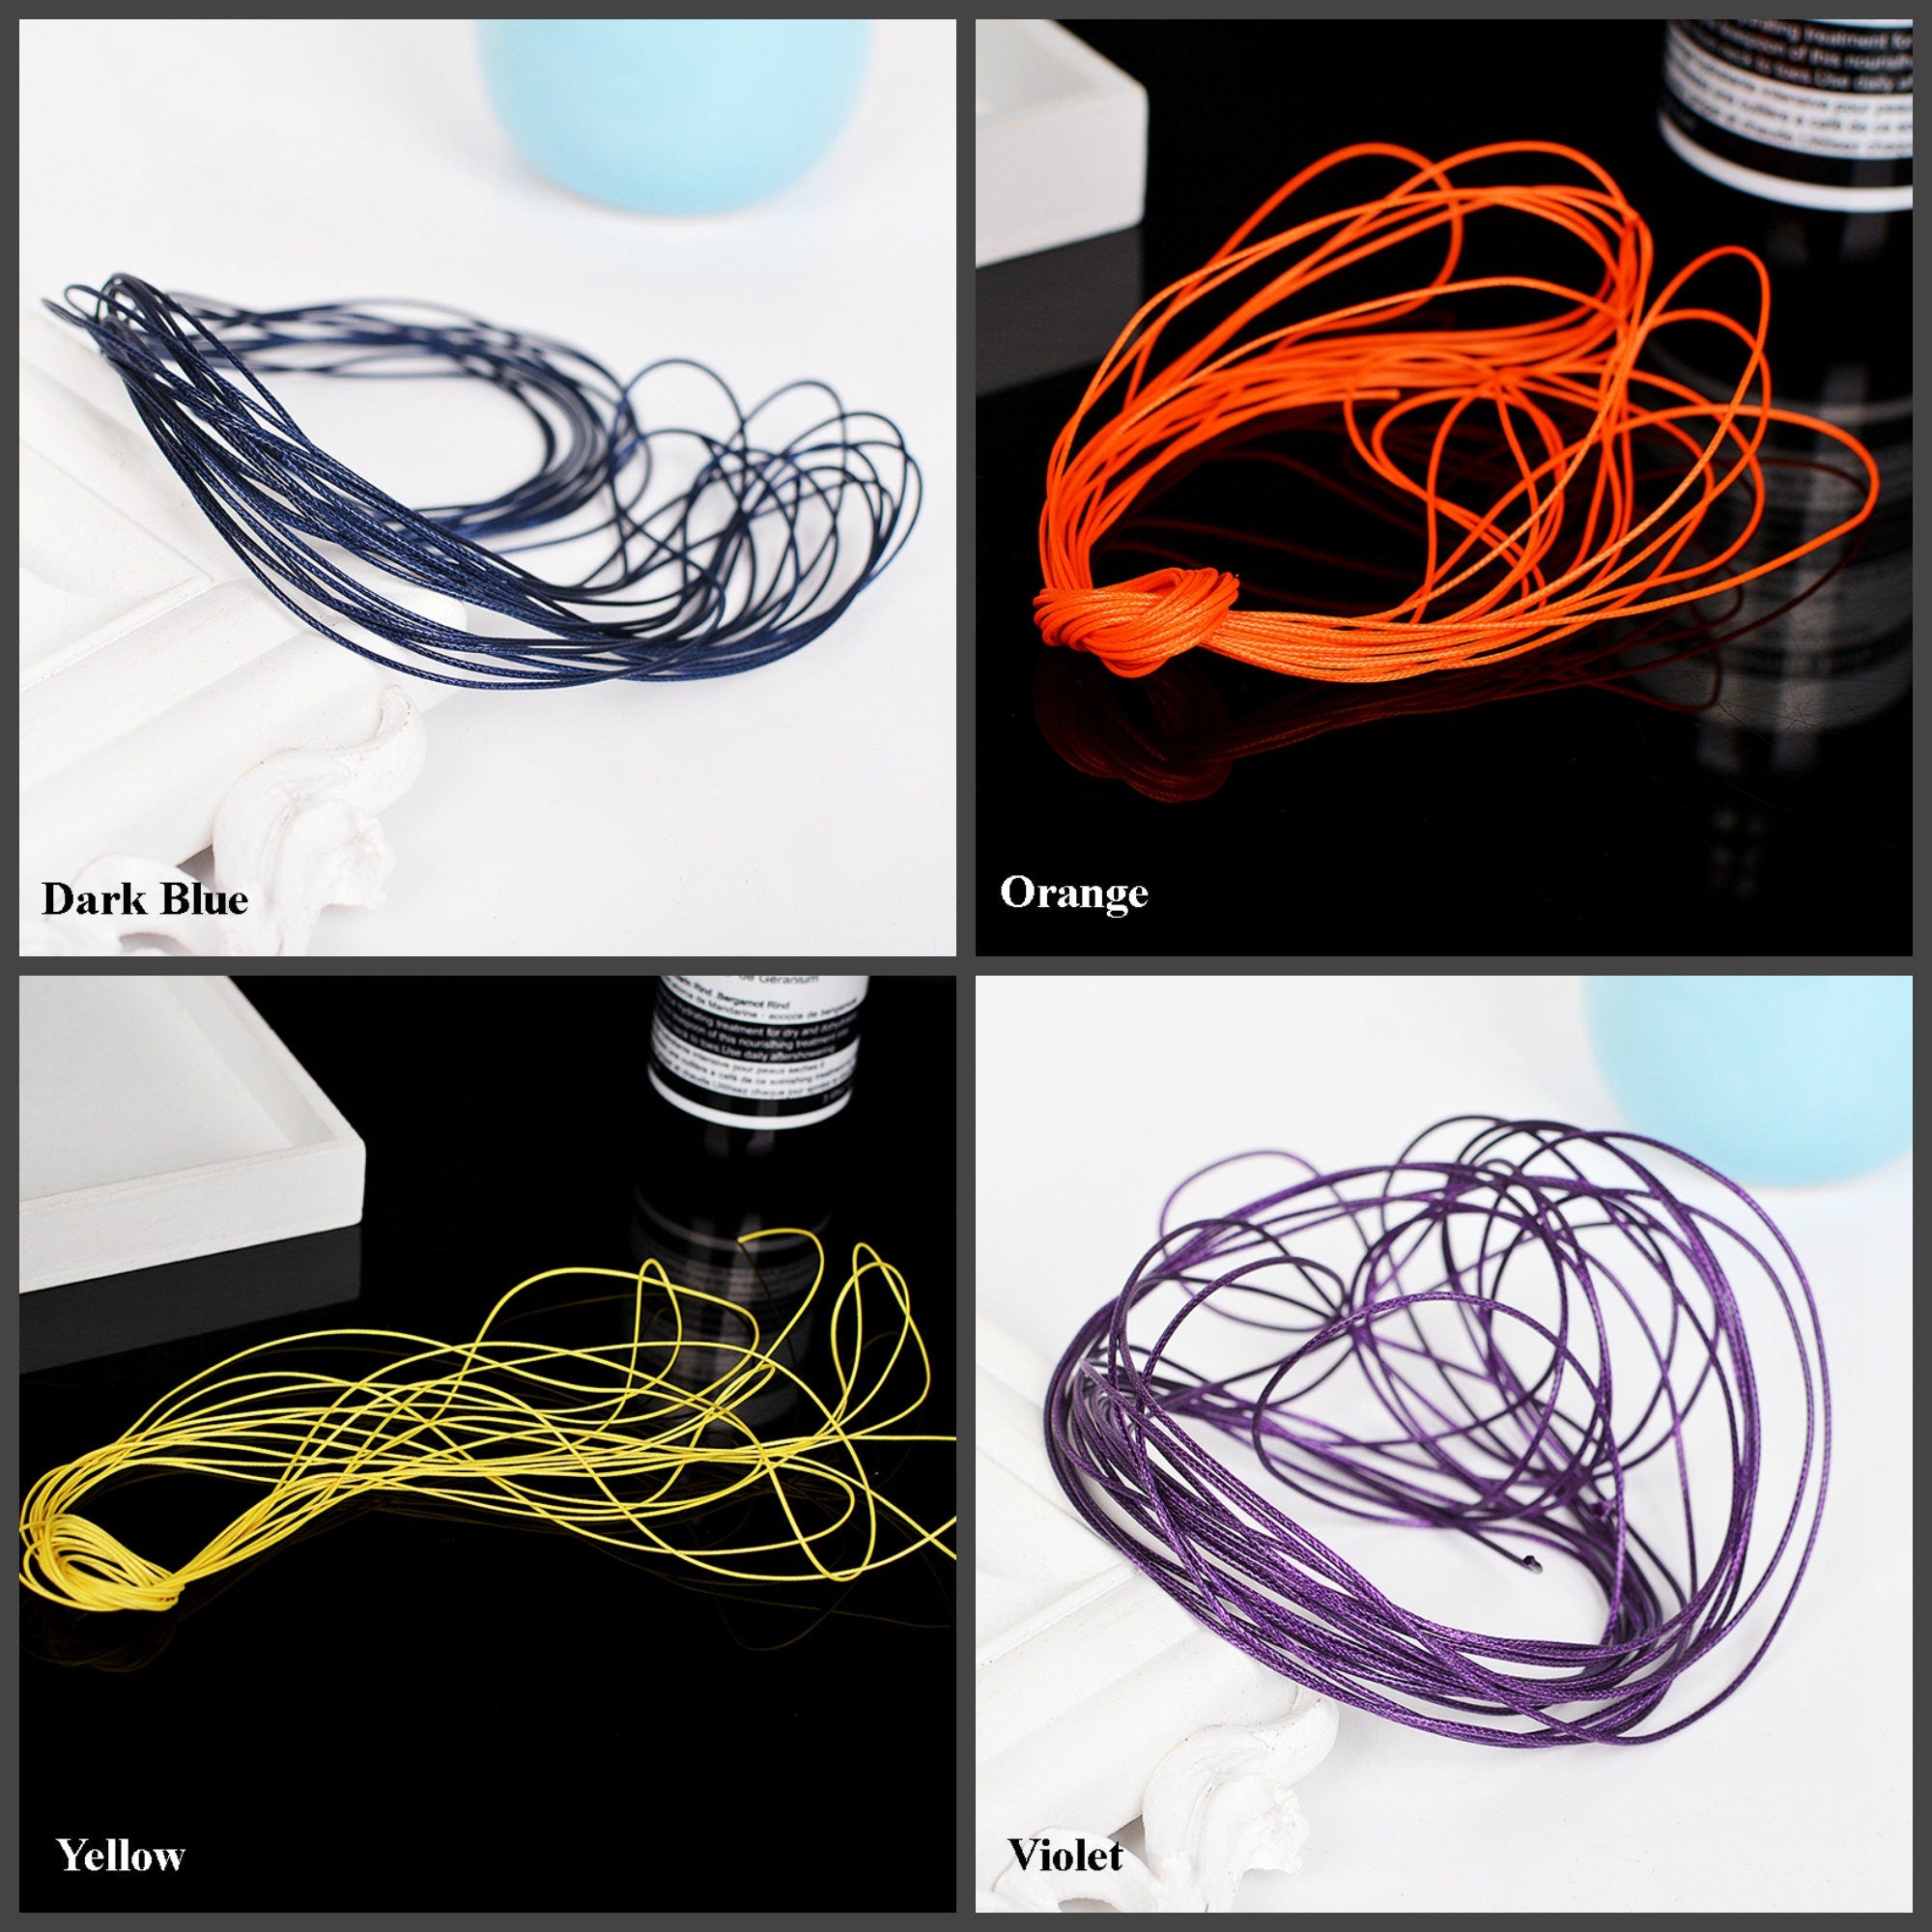 Waxed Braided Macrame Cord Thread Rope Thickness 0.7mm Length 5m 21 Colors DIY Beading String Jewelry Making Supply